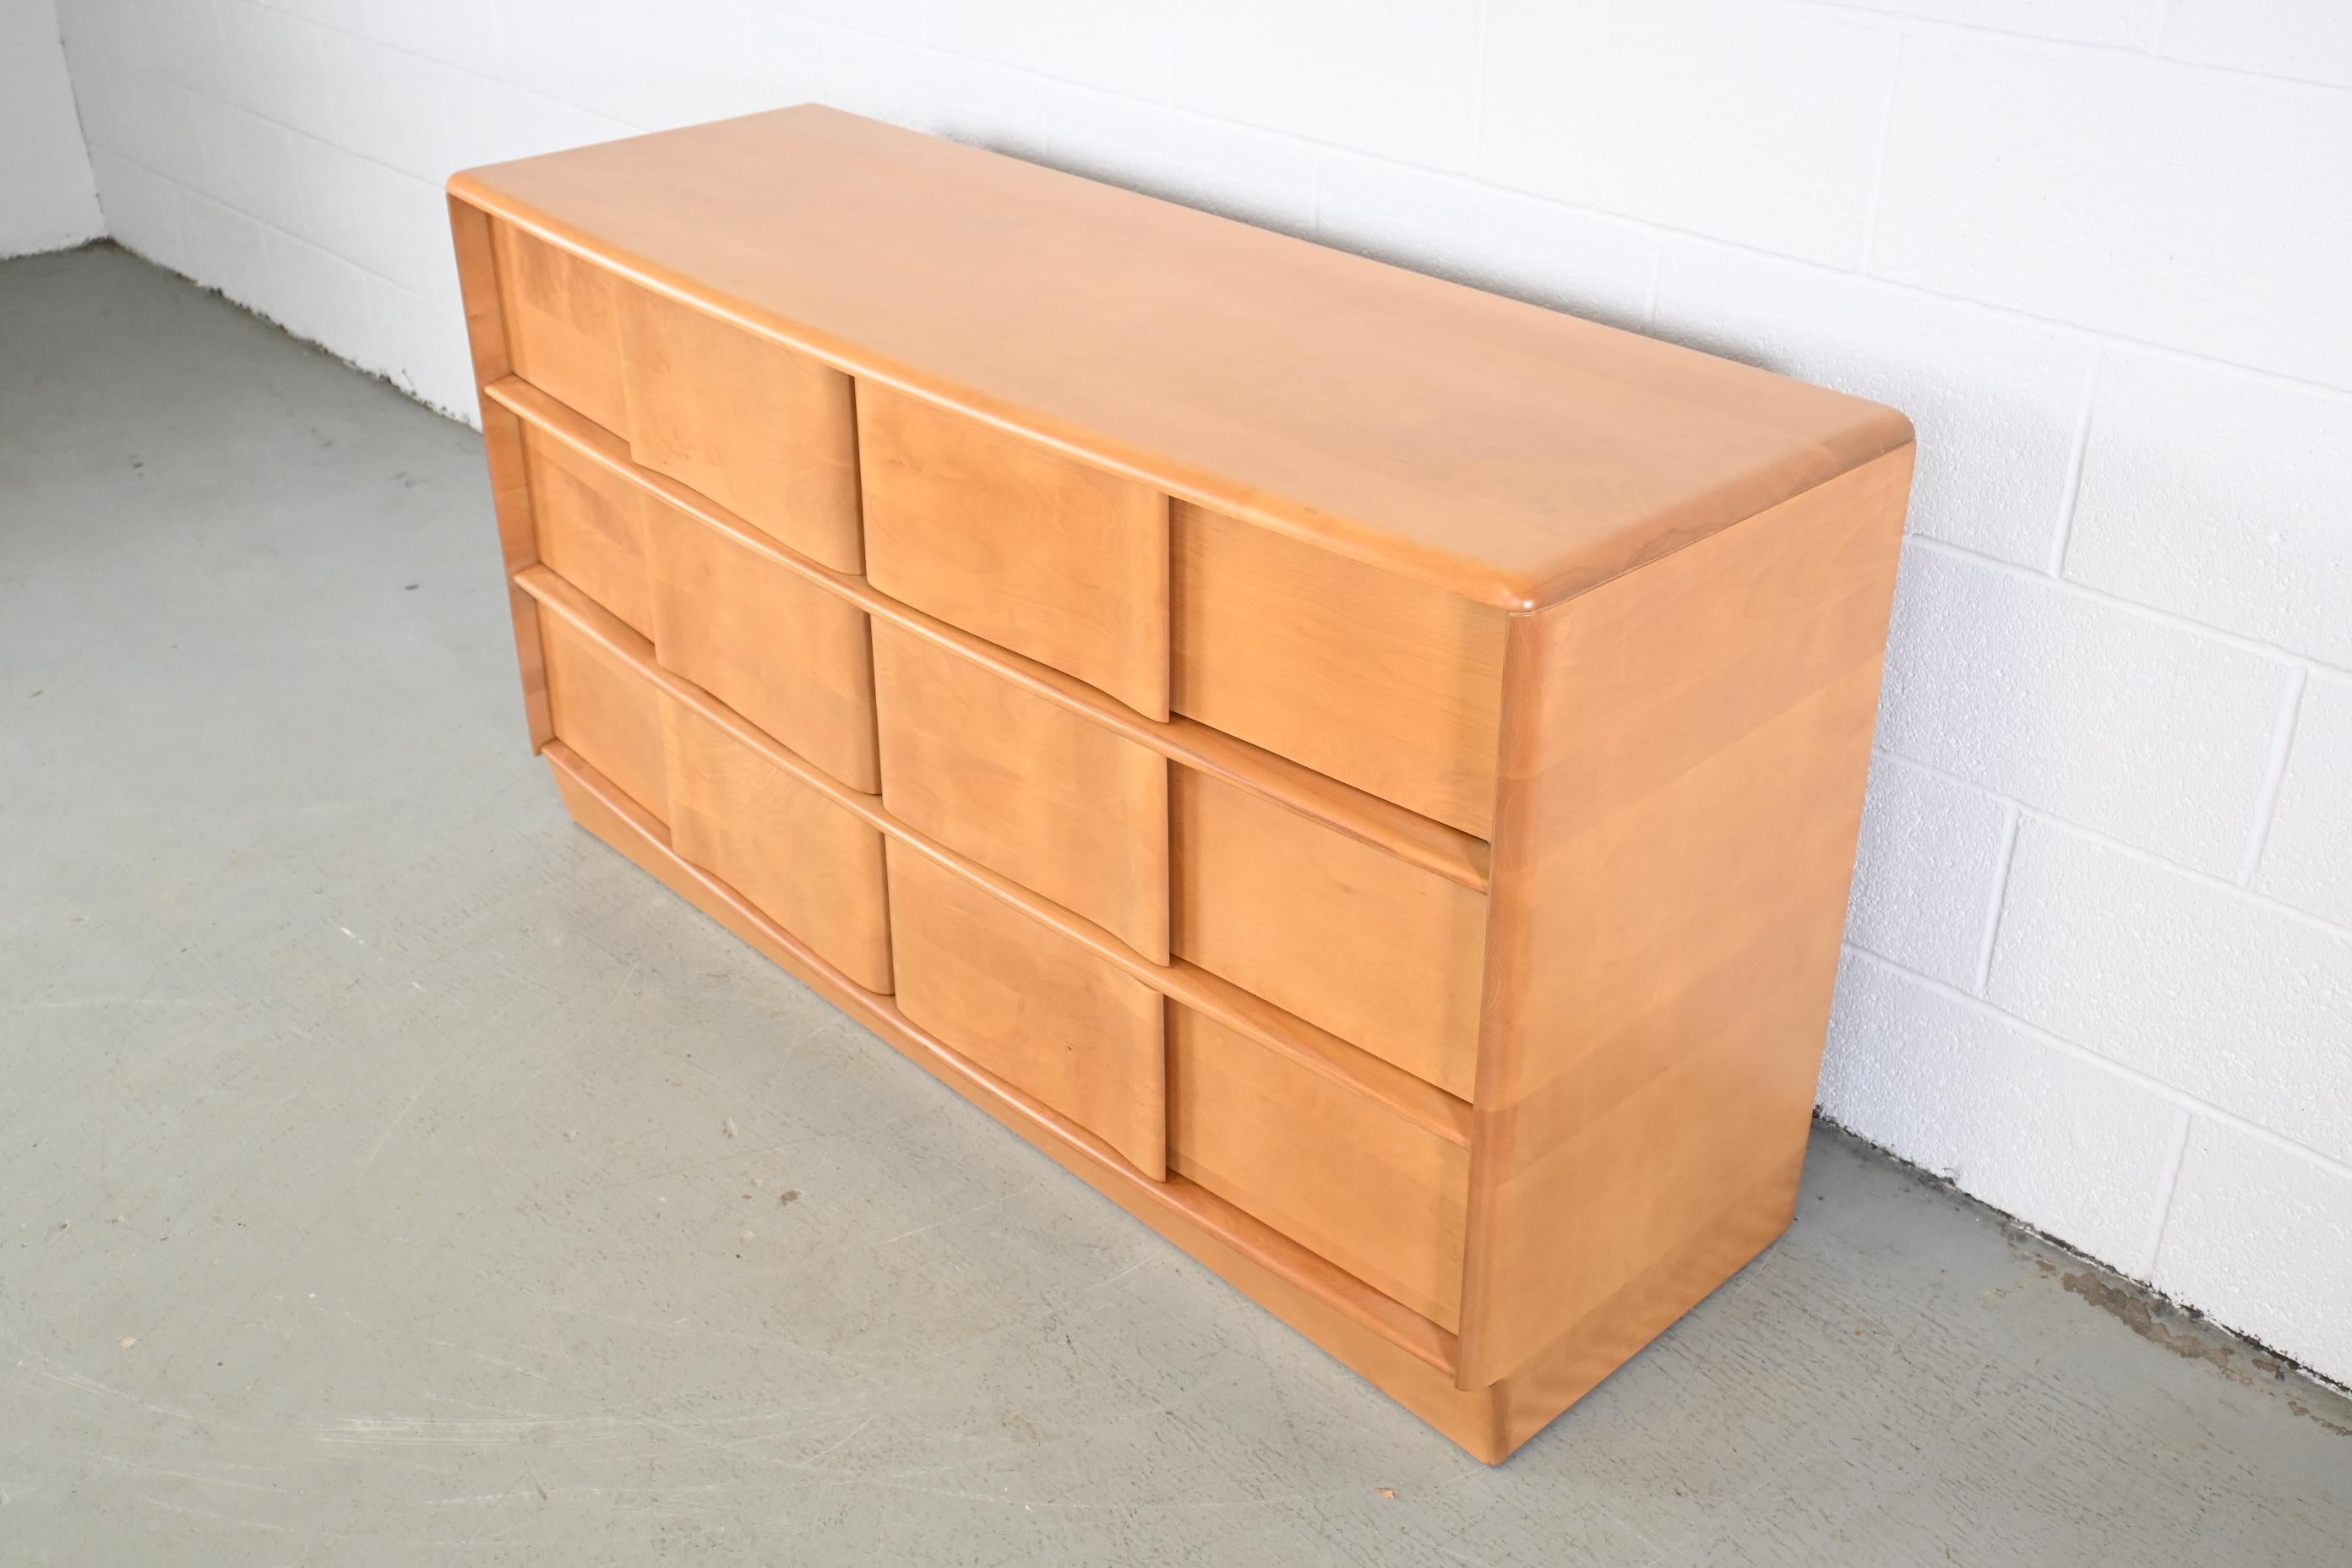 Lacquered Heywood-Wakefield Sculptura Mid-Century Modern Dresser, Newly Refinished